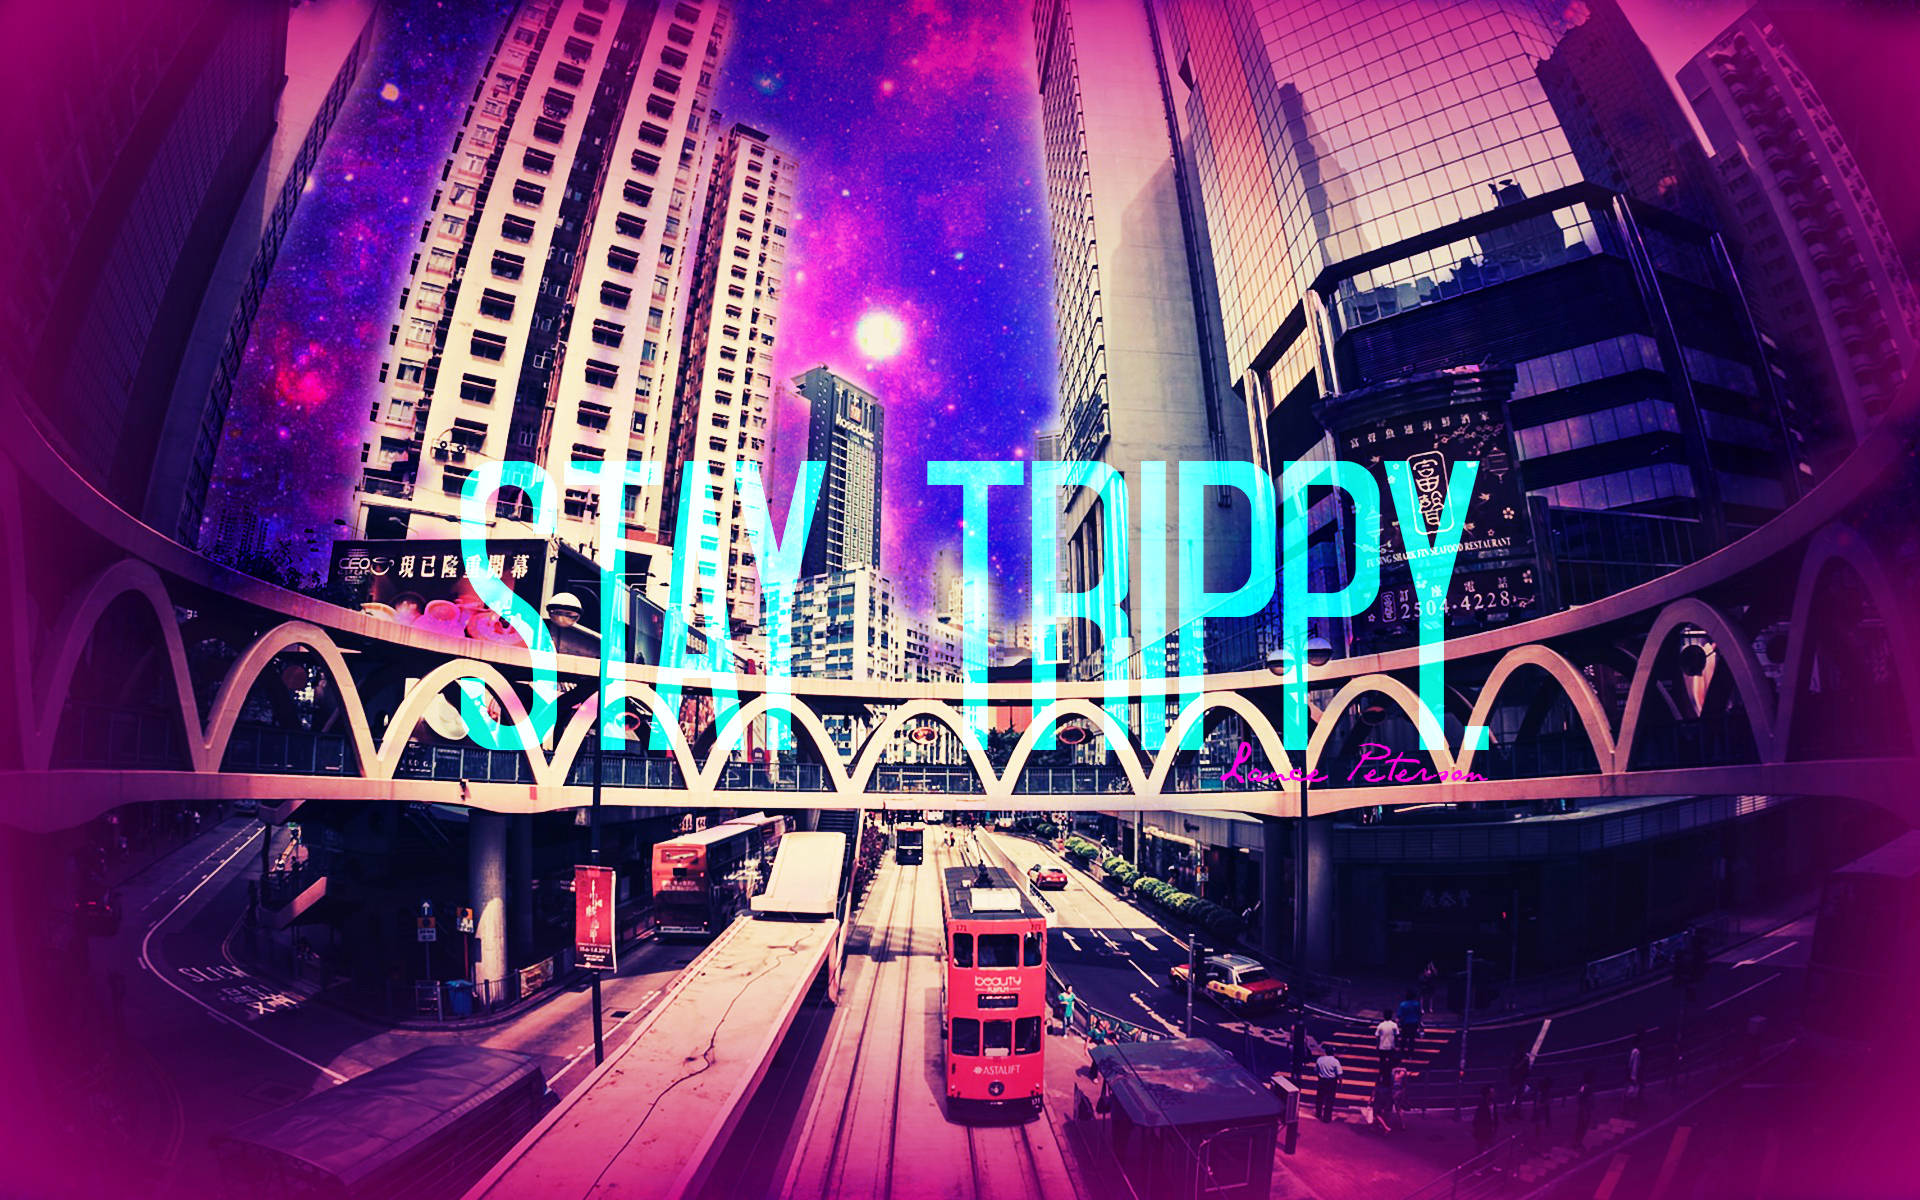 Hold dig trippy City dope laptop wallpaper. Wallpaper